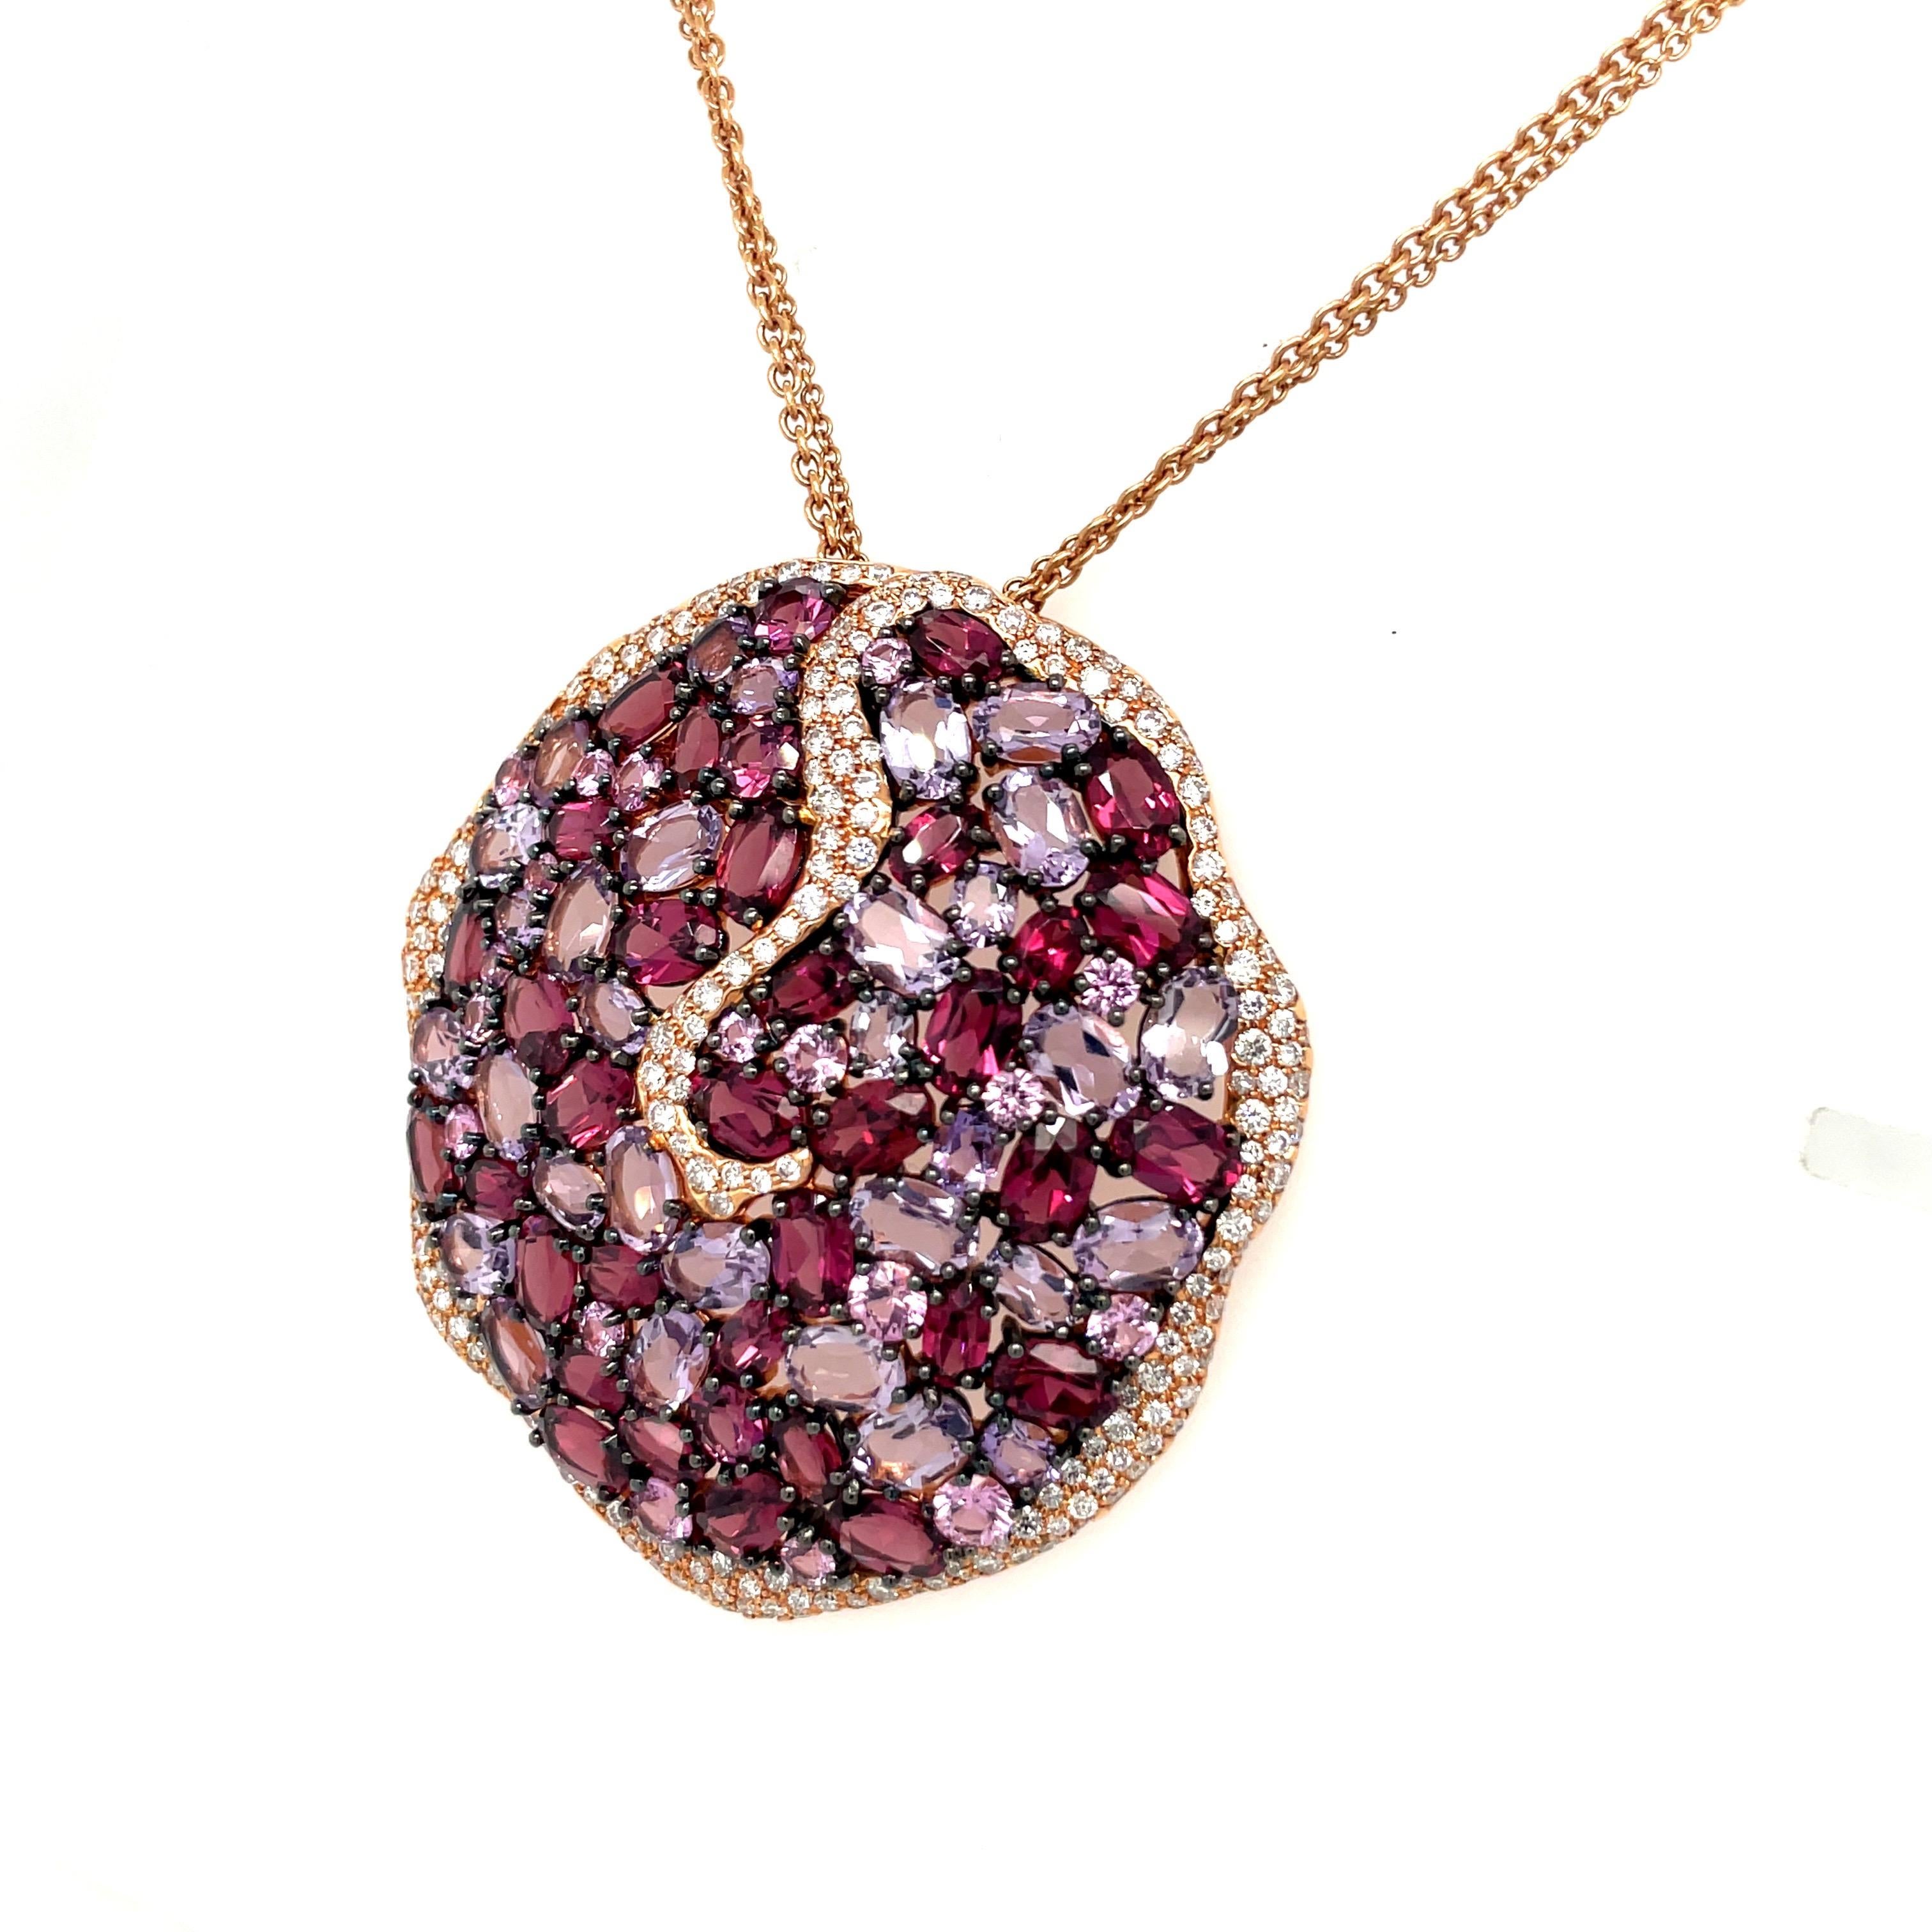 Contemporary Rodney Rayner 18KT Rose Gold Pendant with Diamonds, Rhodolite, & Amethyst For Sale